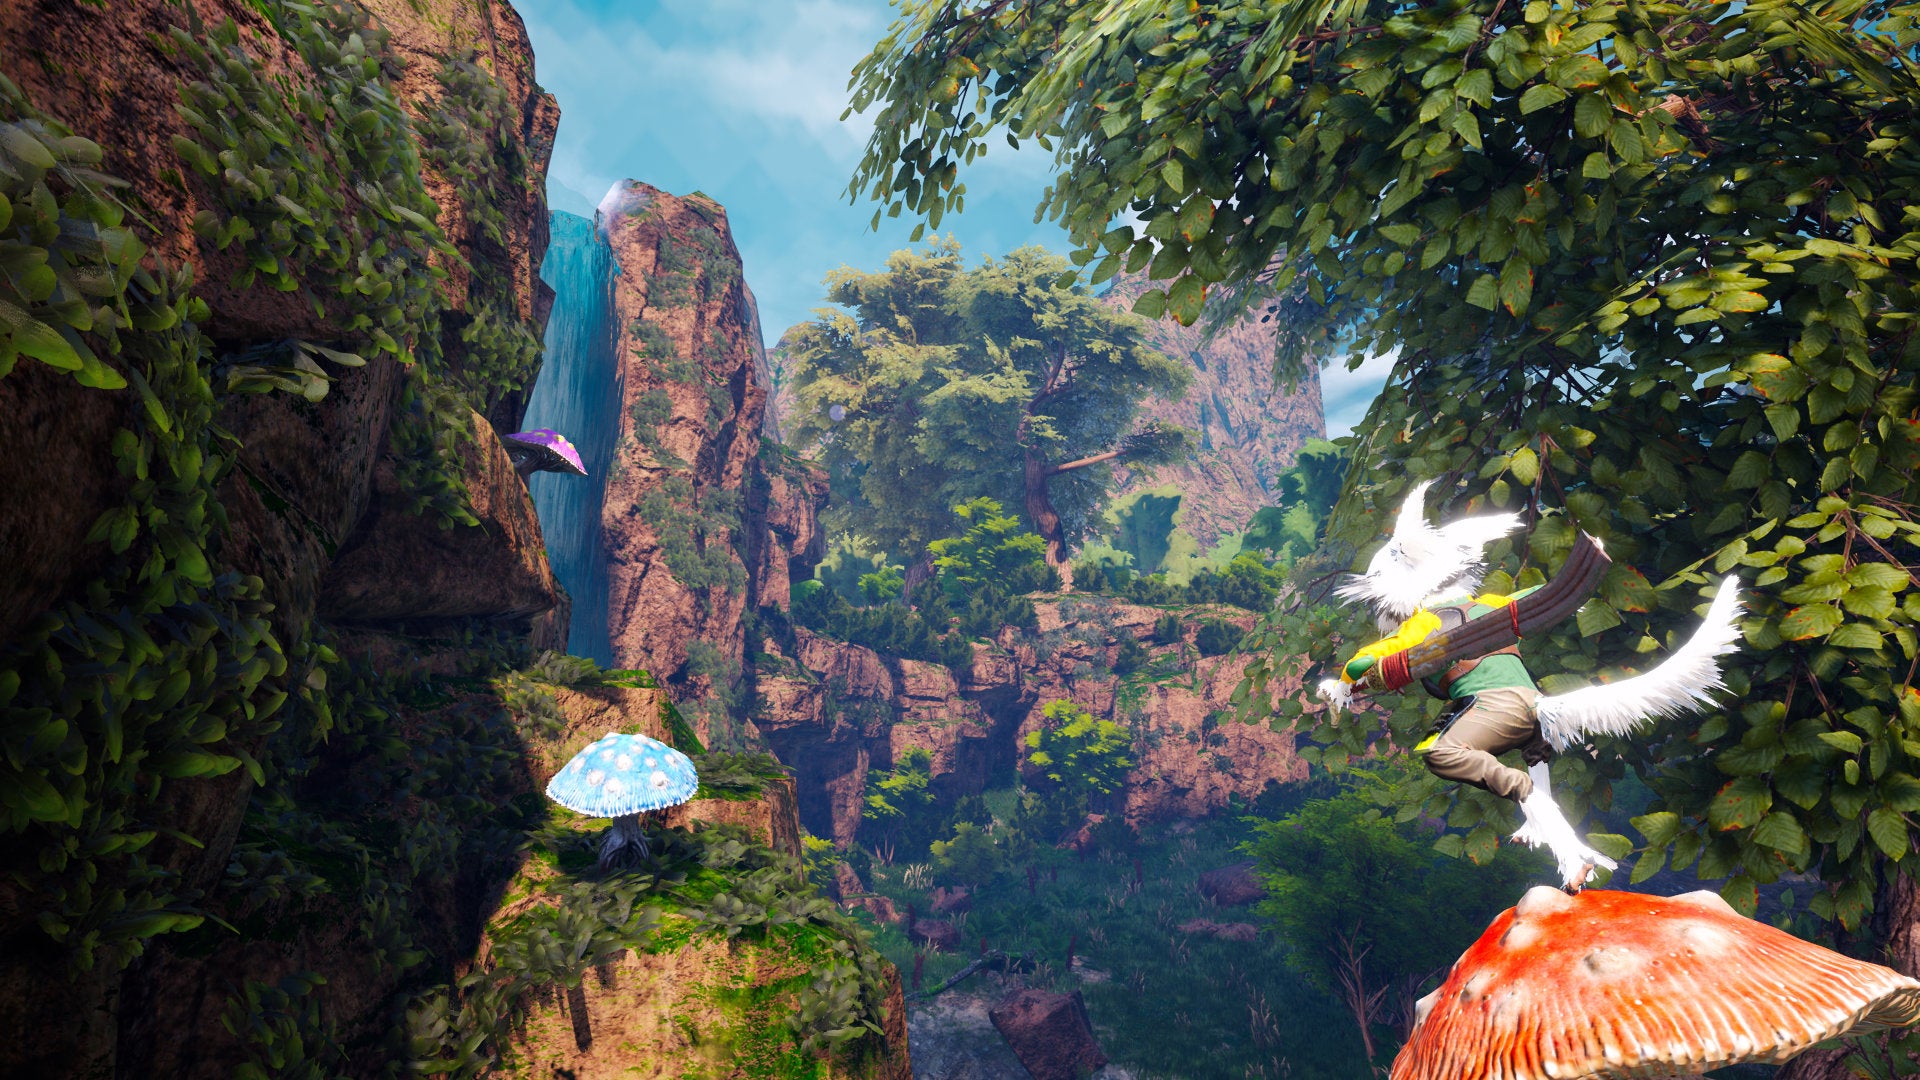 A Biomutant screenshot of the main character bouncing off the head of a toadstool in a forest.